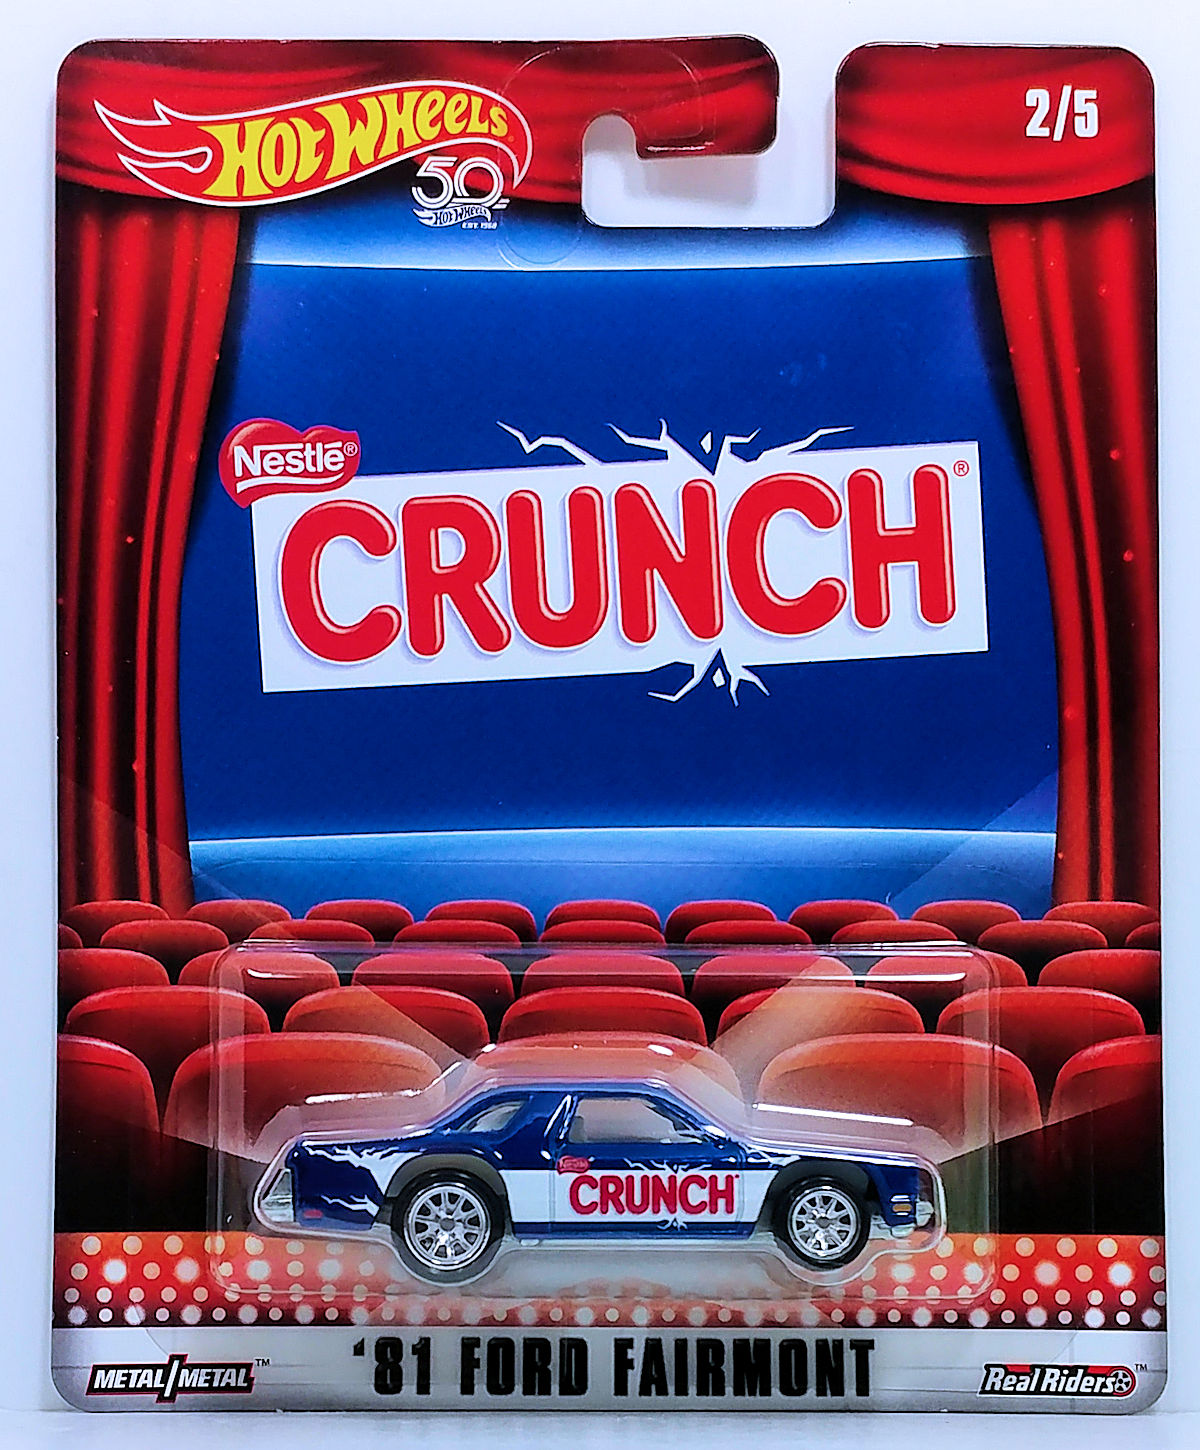 Hot Wheels 2018 - Premium / Pop Culture / Nestles Crunch - '81 Ford Fairmont - Blue with White Stripes on top and 'Nestles Crunch' on sides - Metal/Metal & Real Riders